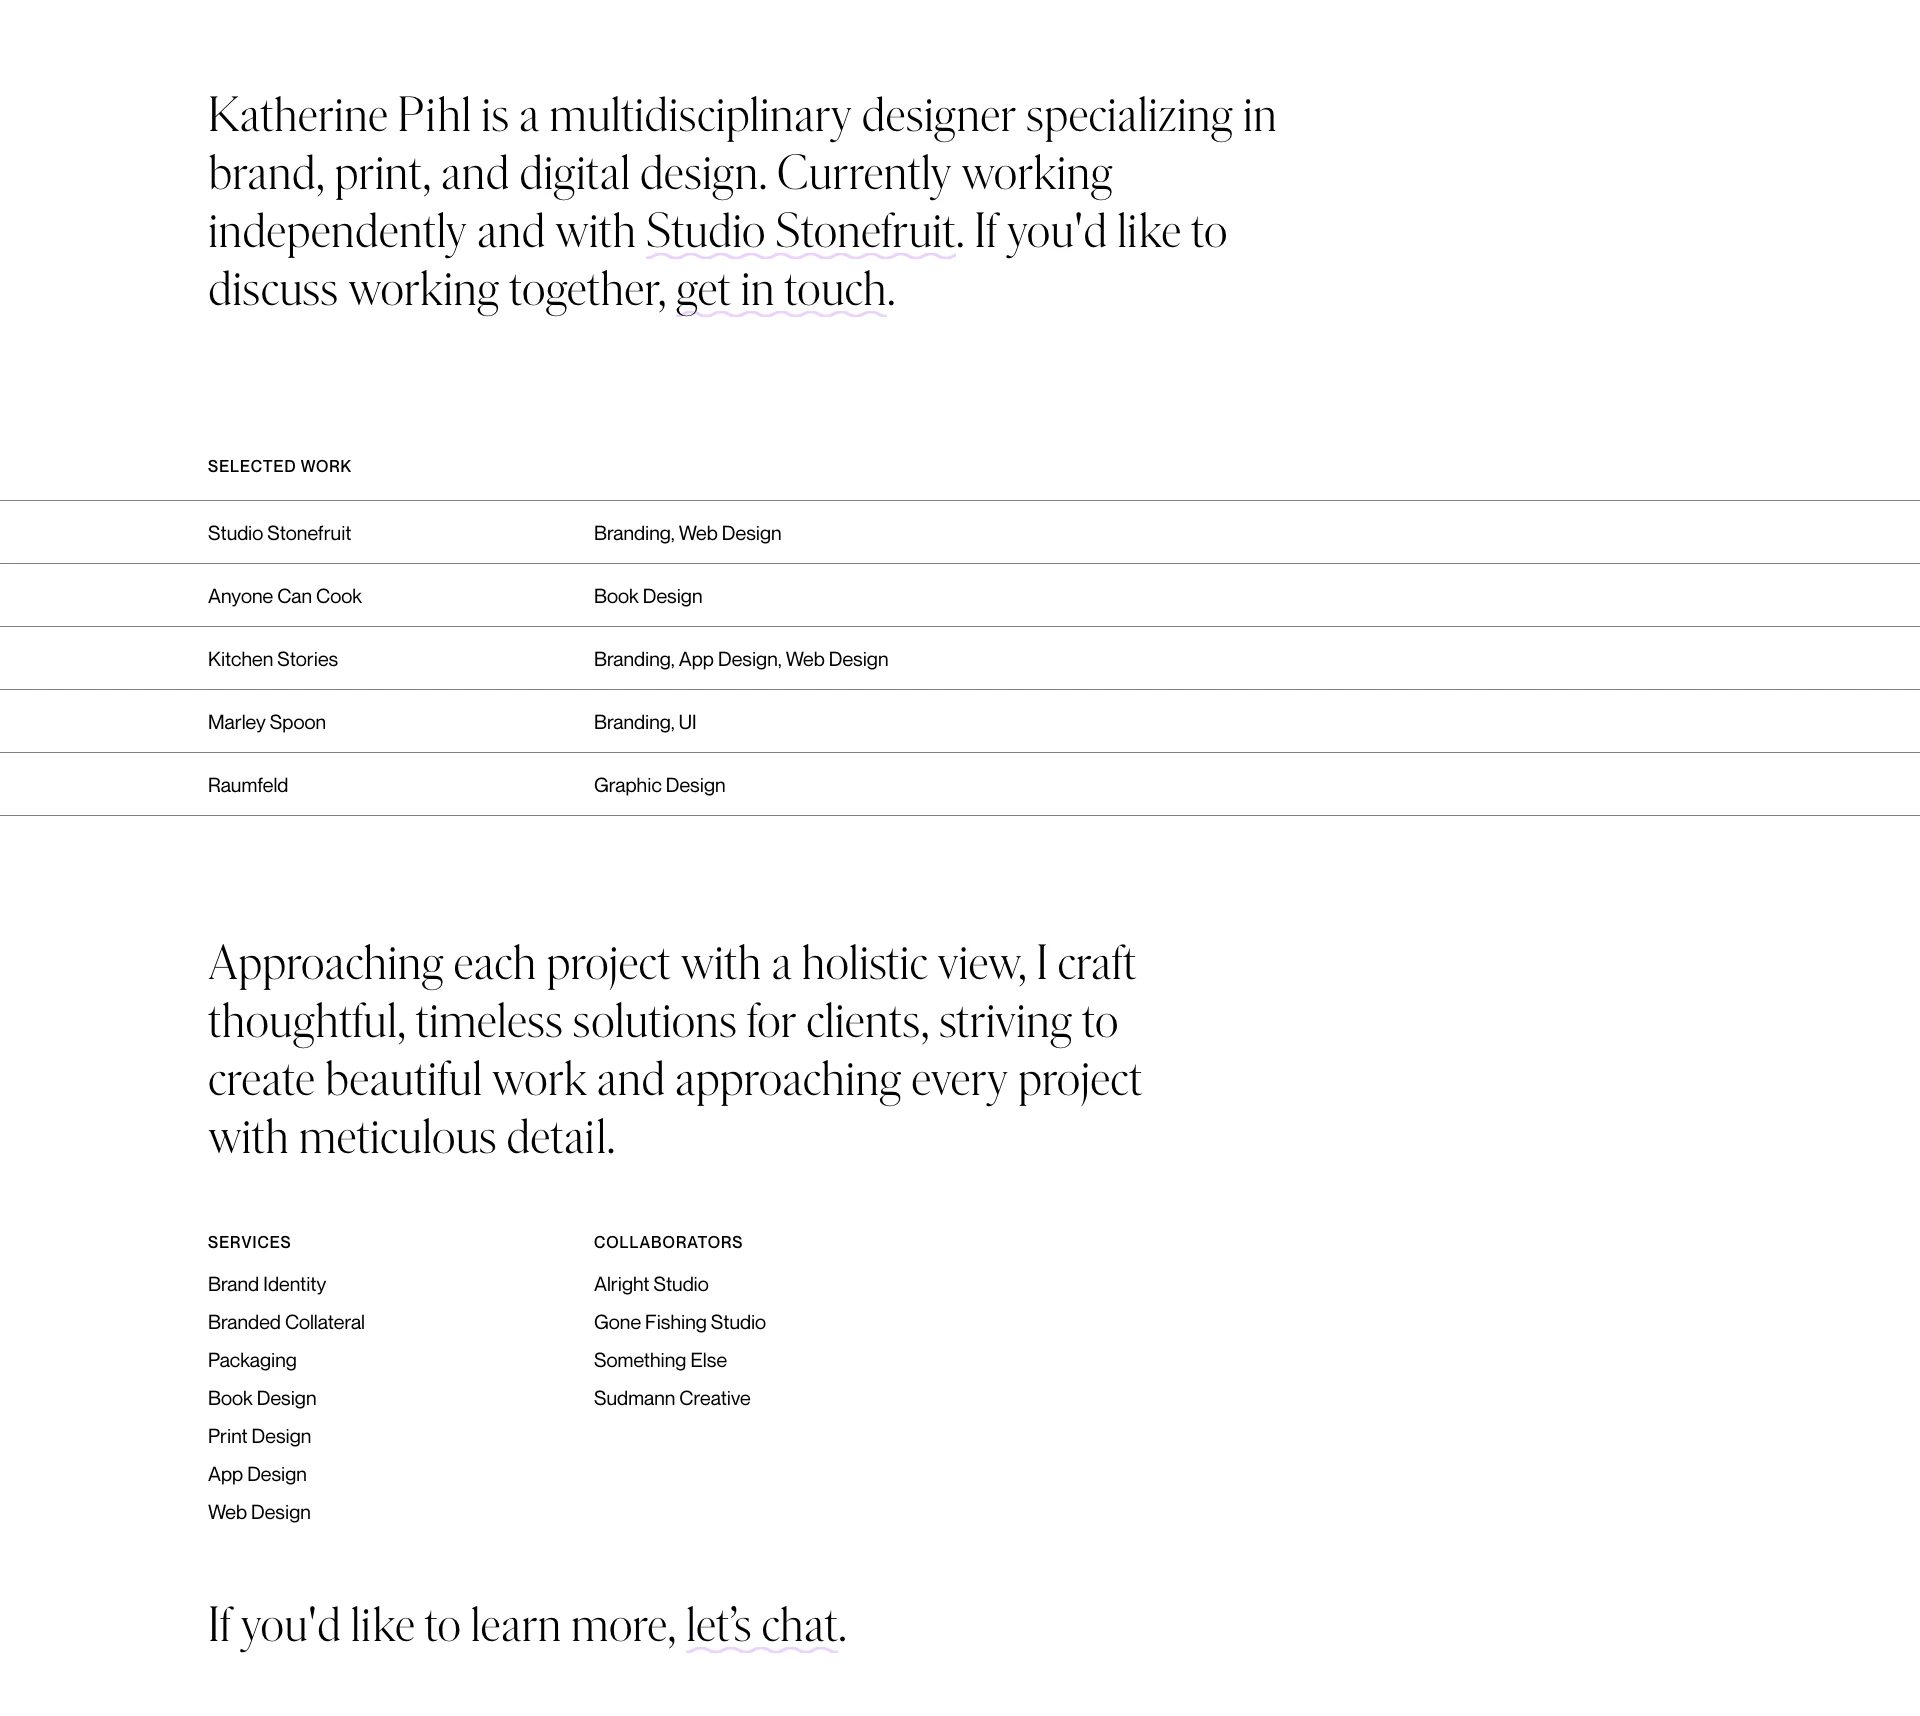 Katherine Pihl Landing Page Example: Katherine Pihl is a multidisciplinary designer specializing in brand, print, and digital design. Currently working independently and with Studio Stonefruit. Approaching each project with a holistic view, I craft thoughtful, timeless solutions for clients, striving to create beautiful work and approaching every project with meticulous detail.